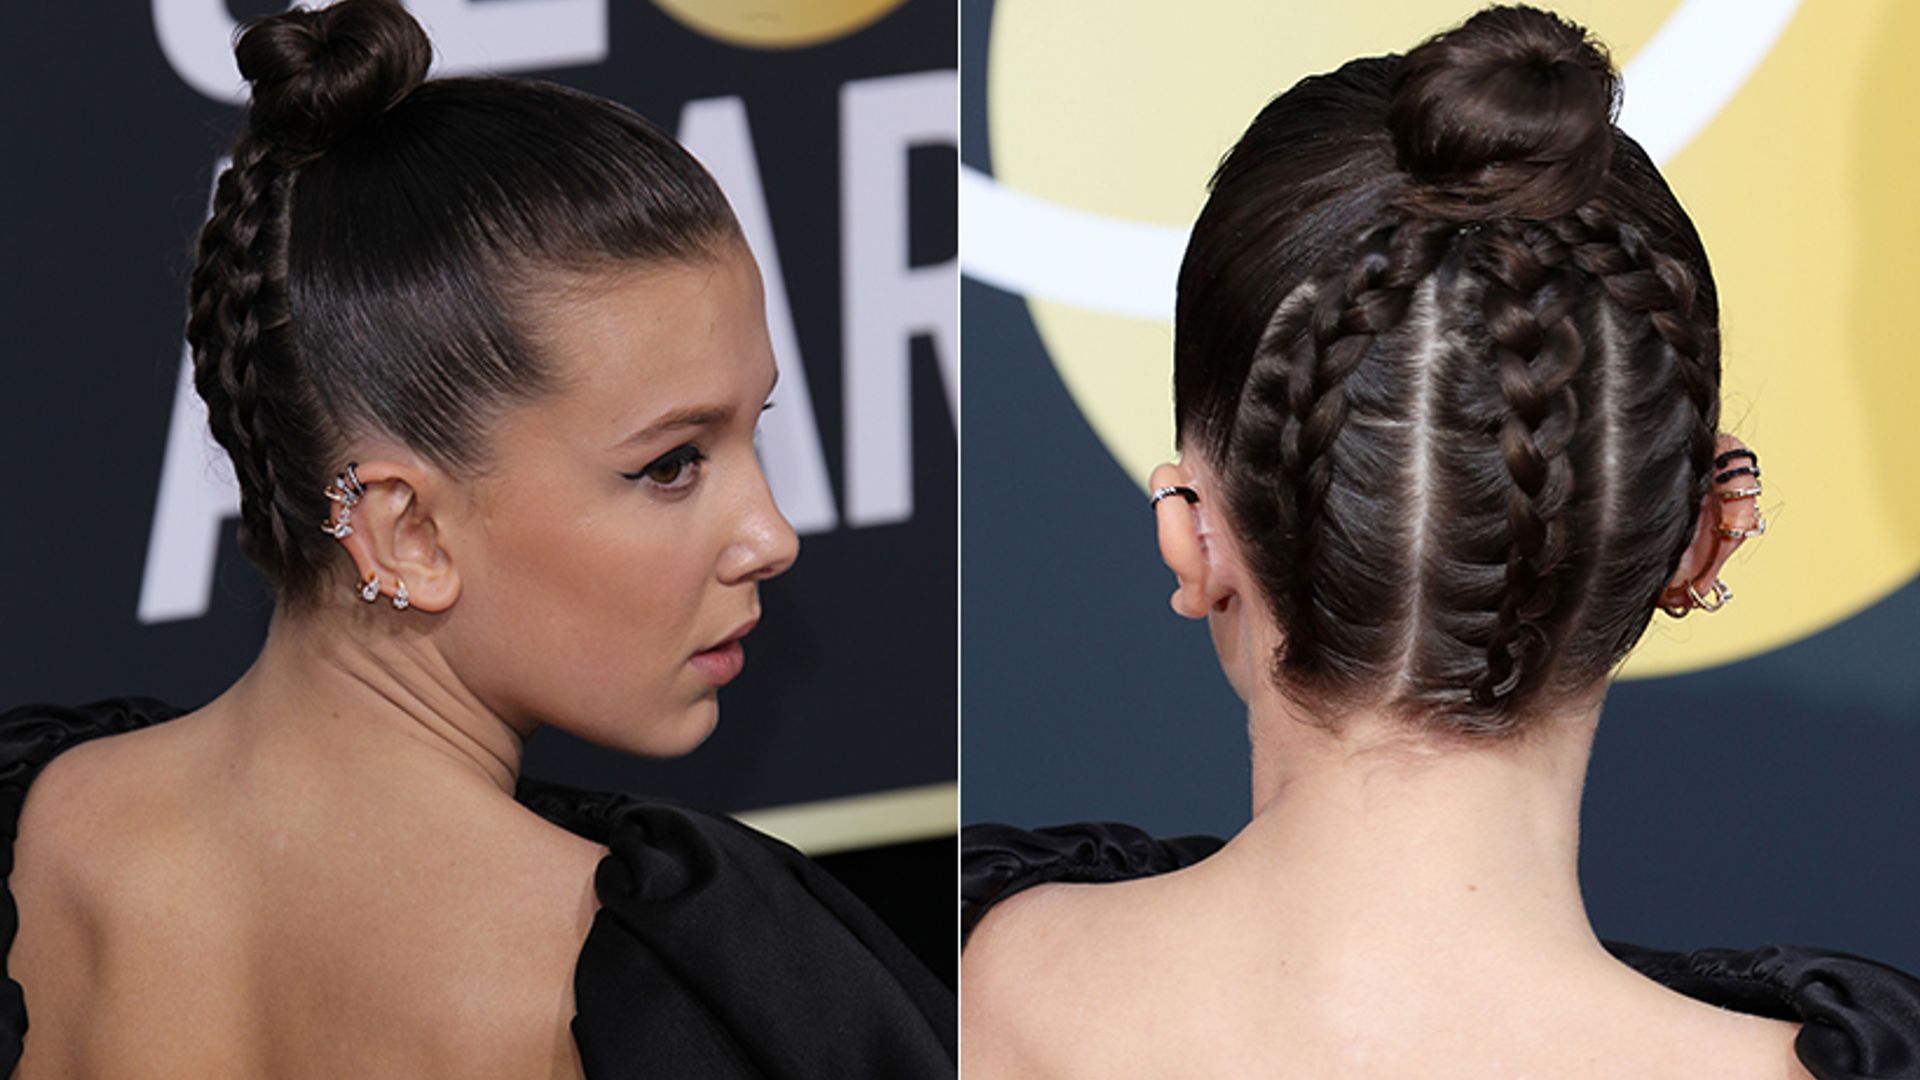 How to recreate Millie Bobby Brown's edgy Golden Globes hair